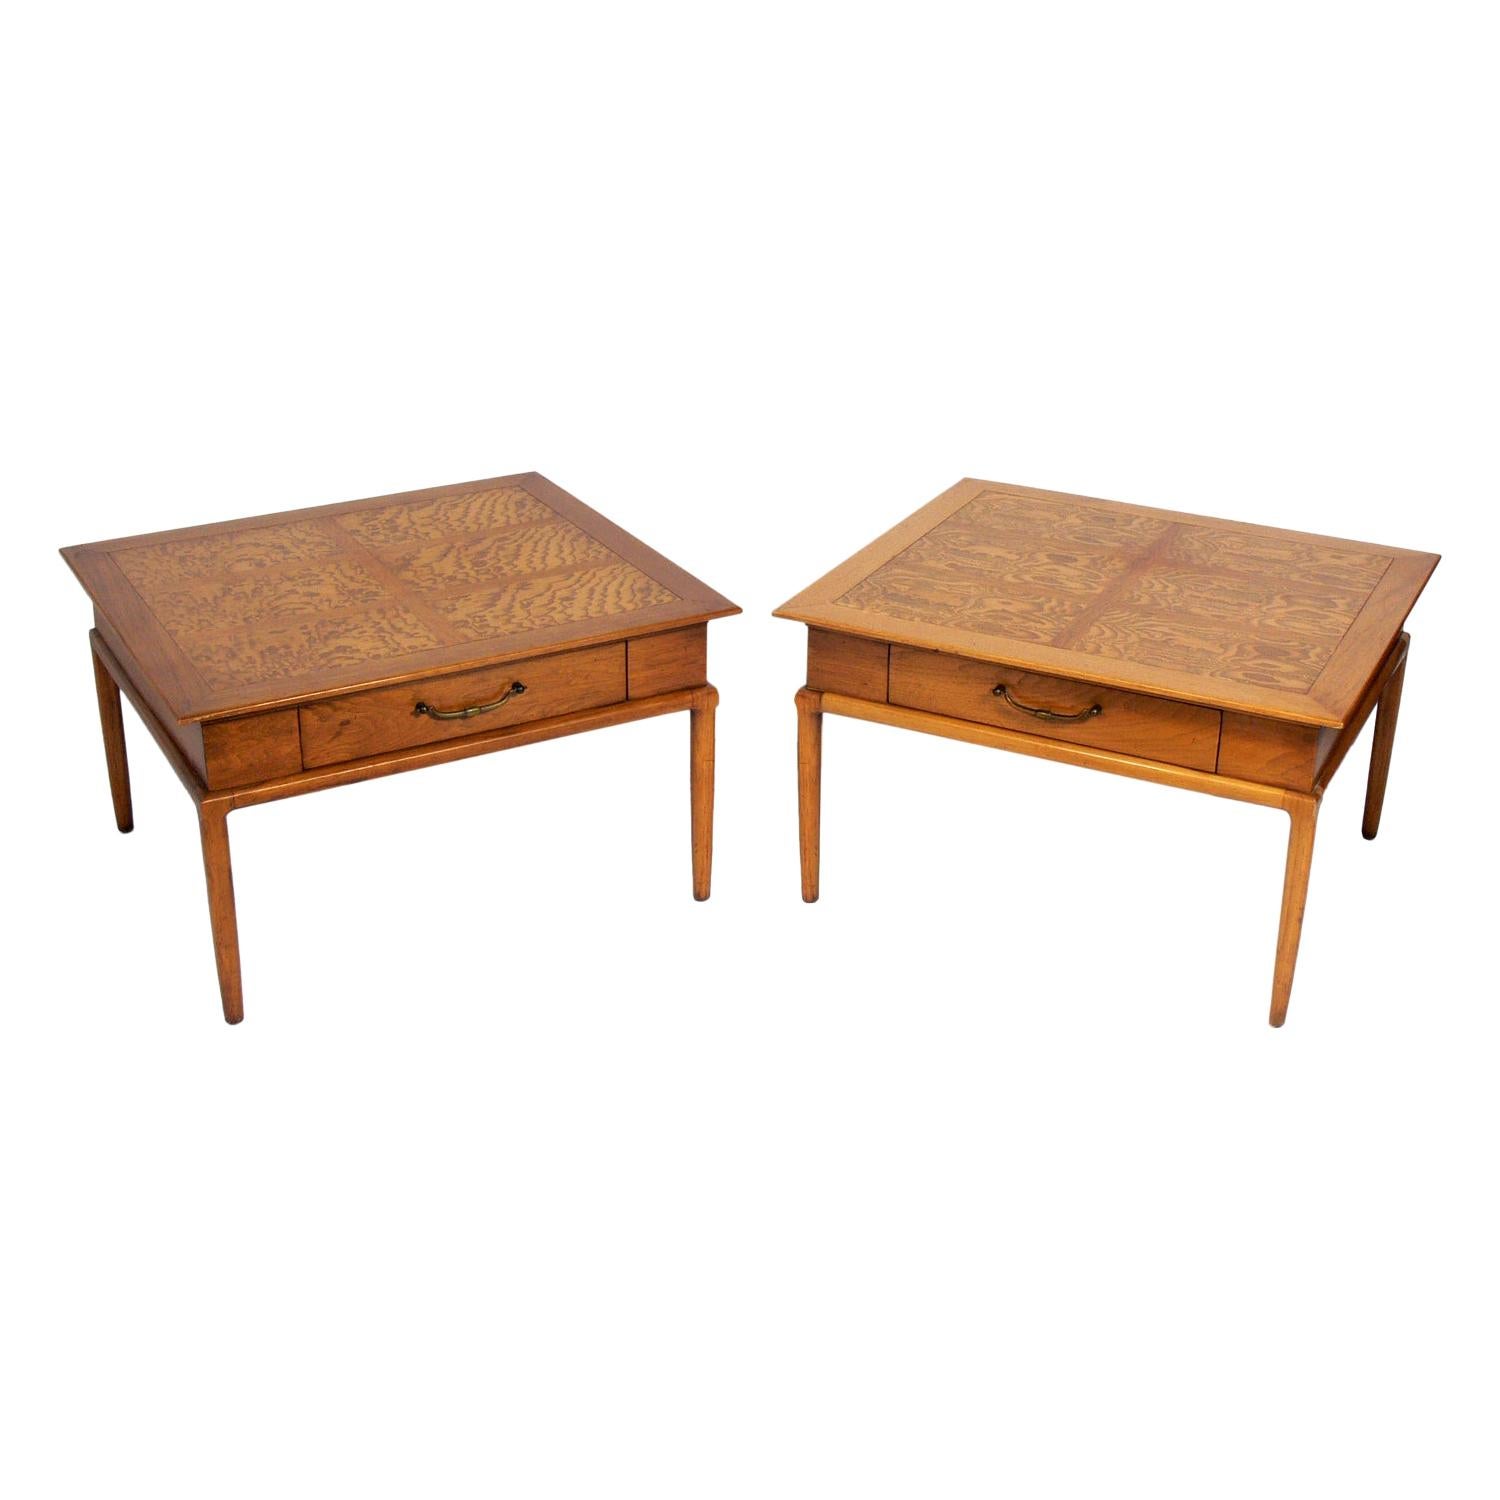 Pair of Large Scale End Tables by Lubberts & Mulder for Tomlinson For Sale